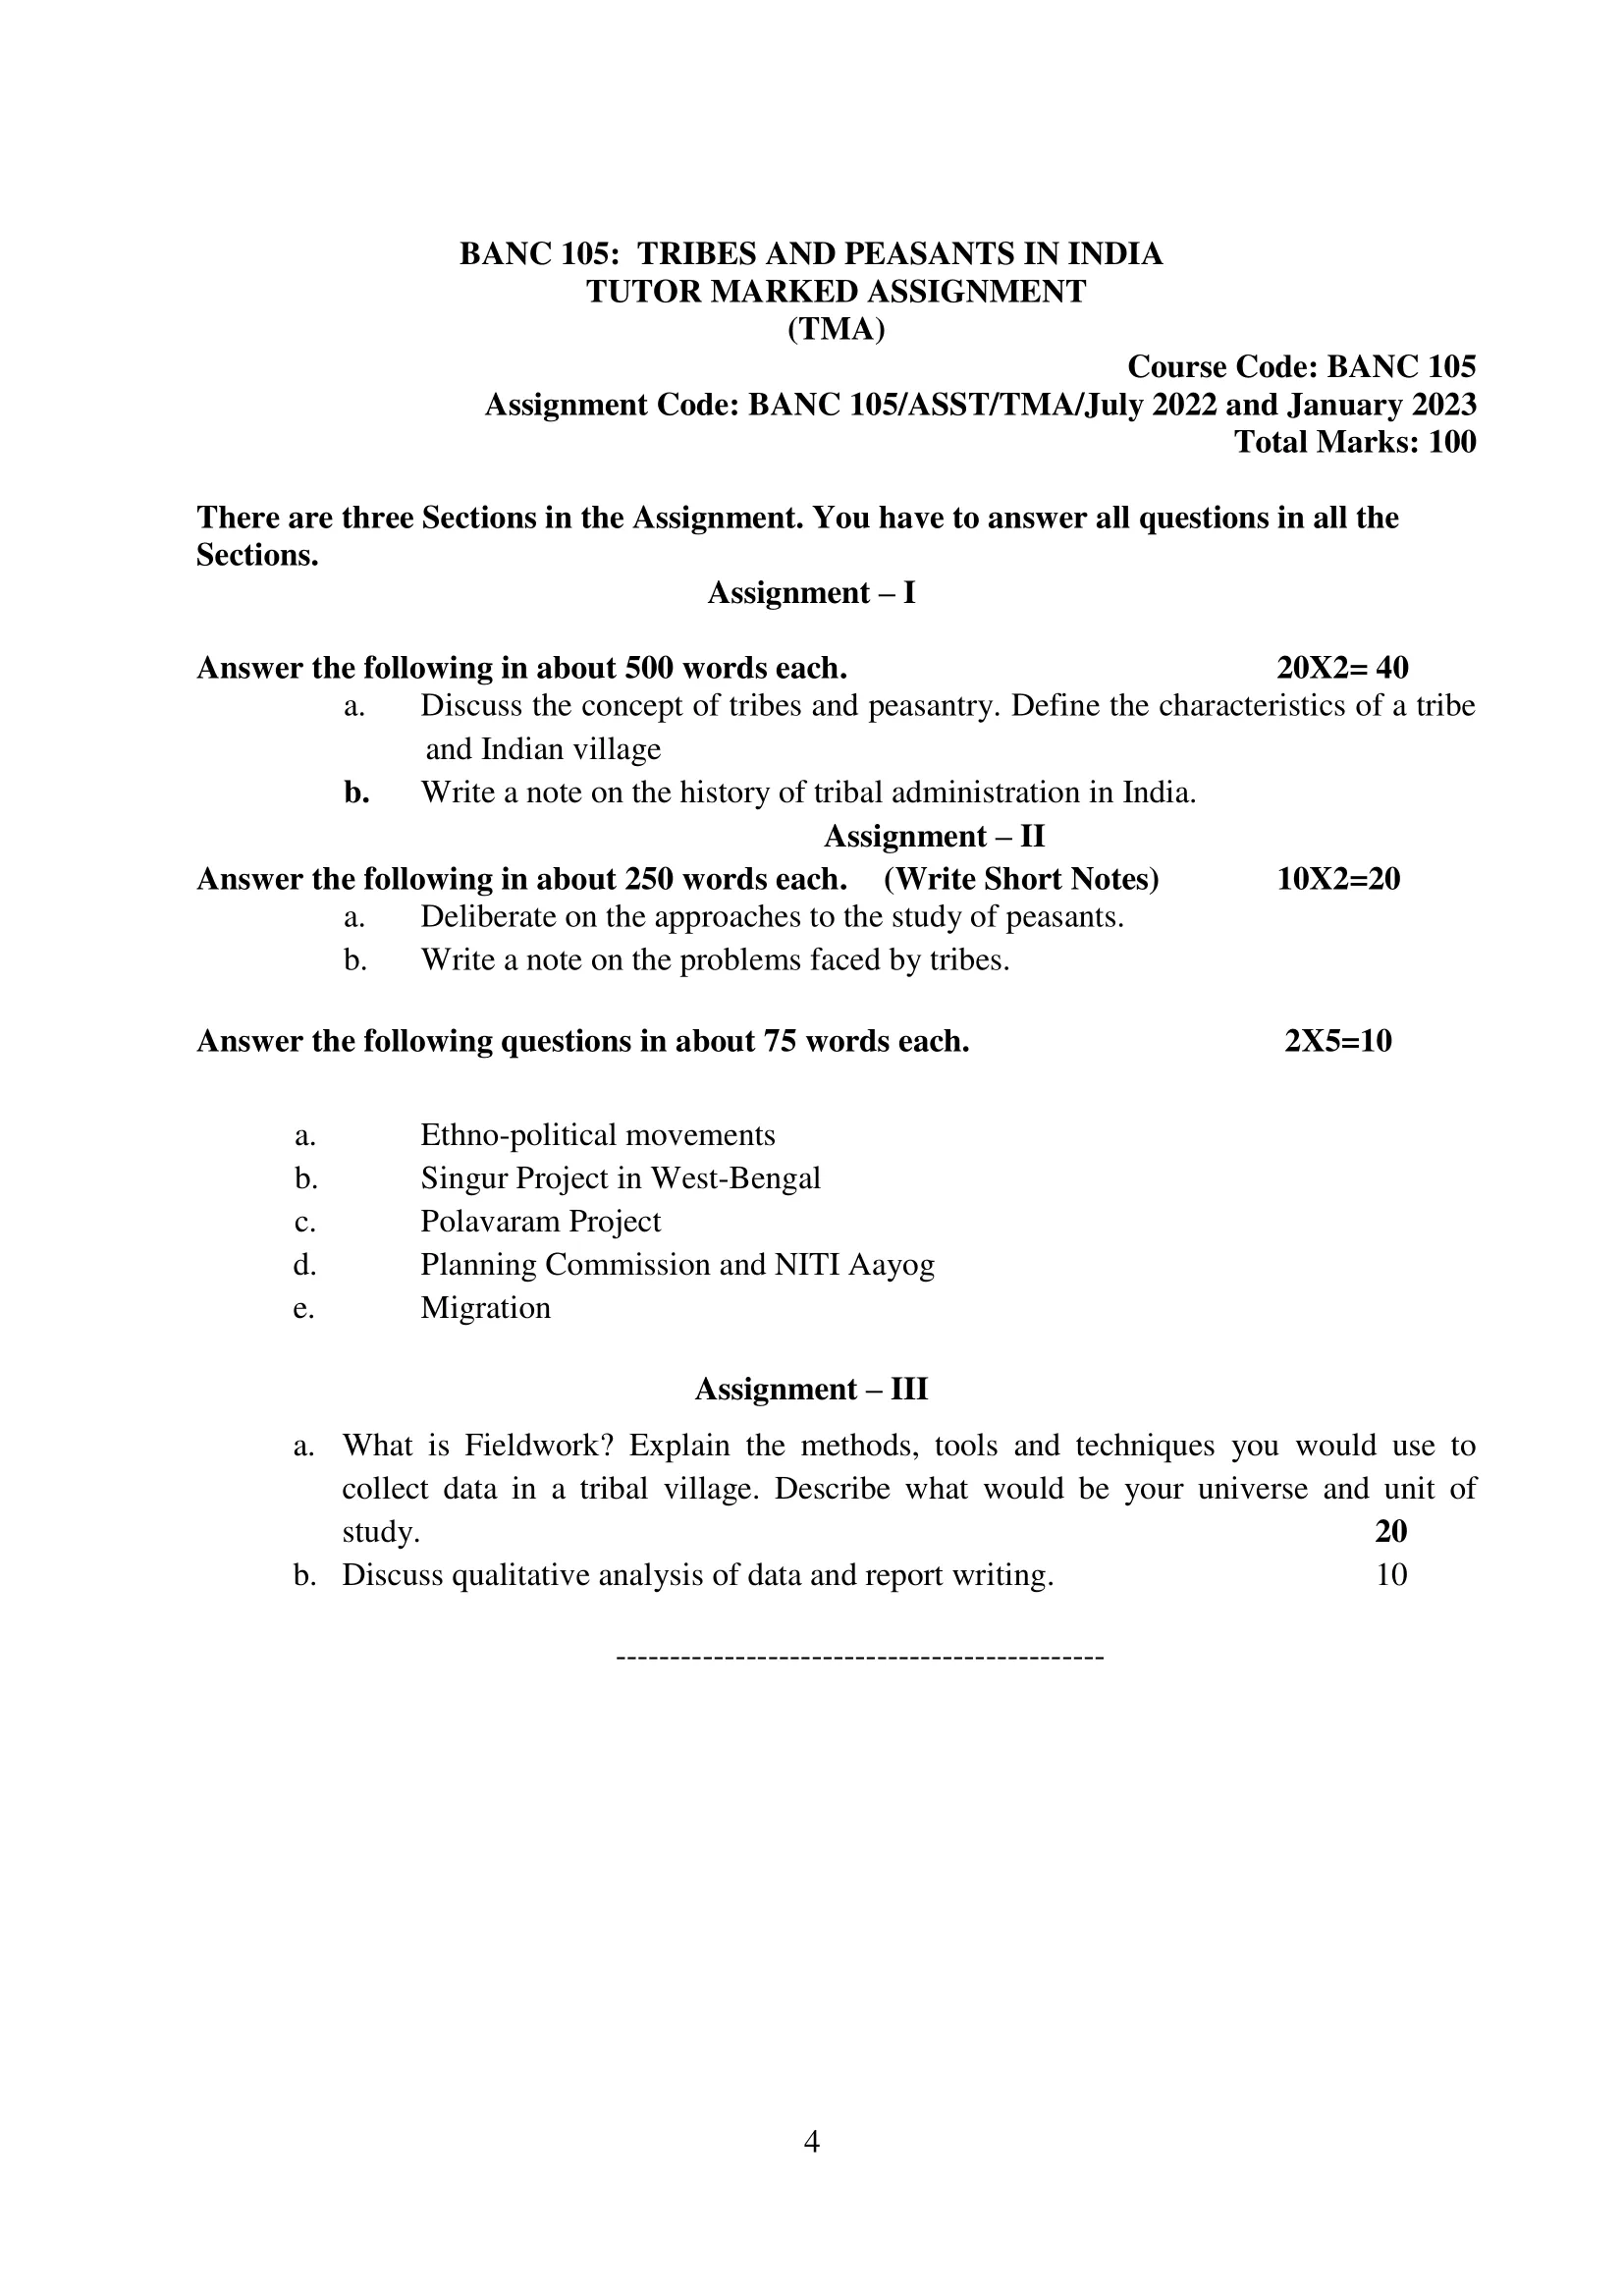 BANC-105 IGNOU Solved Assignment 2022-2023 TRIBES AND PEASANTS IN INDIA